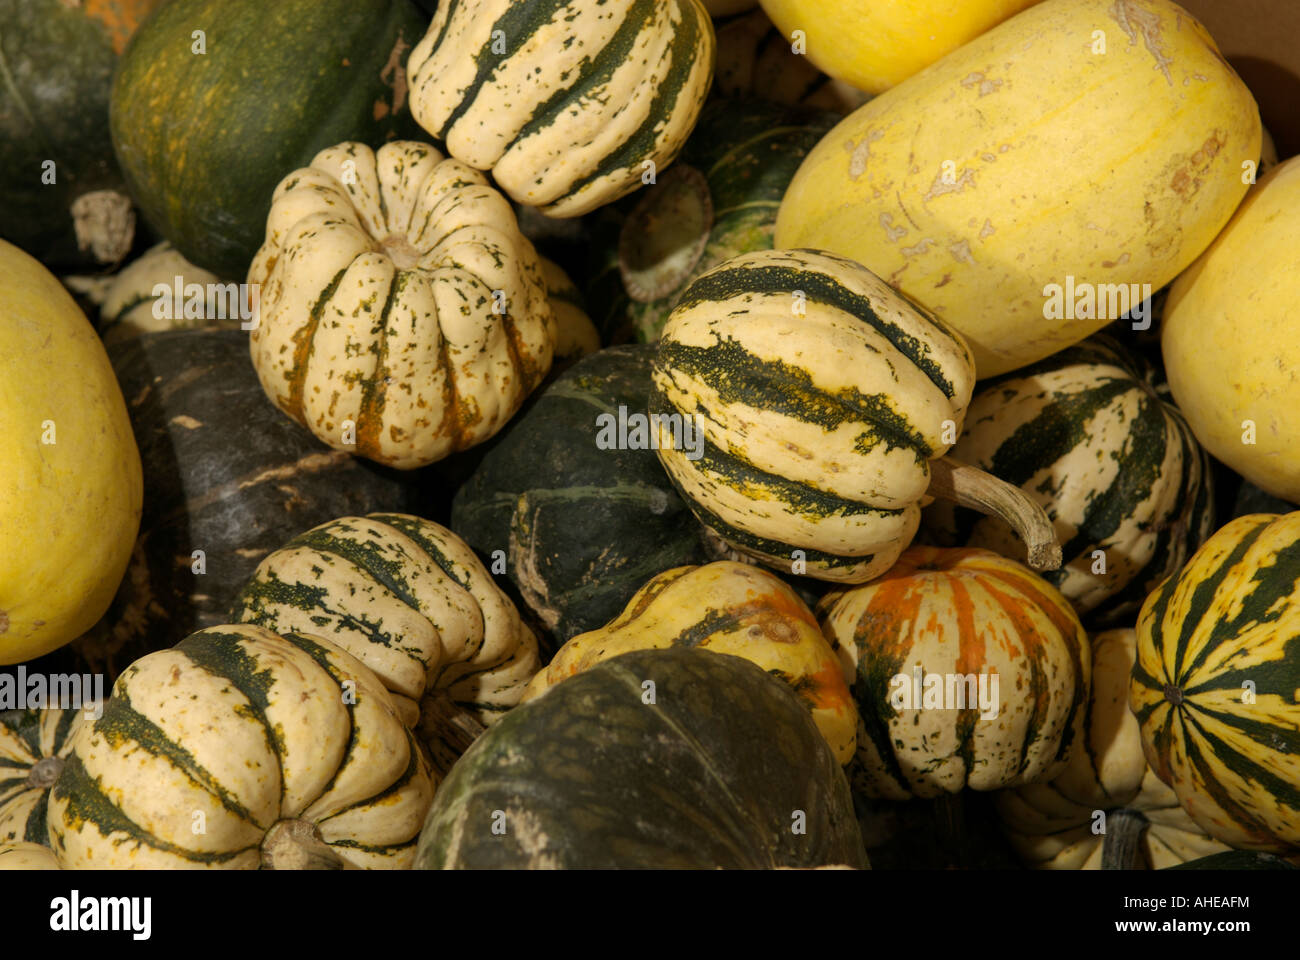 Pile of gourds for sale at a local roadside fruit stand in the farm country of Eastern Washington State, United States Stock Photo